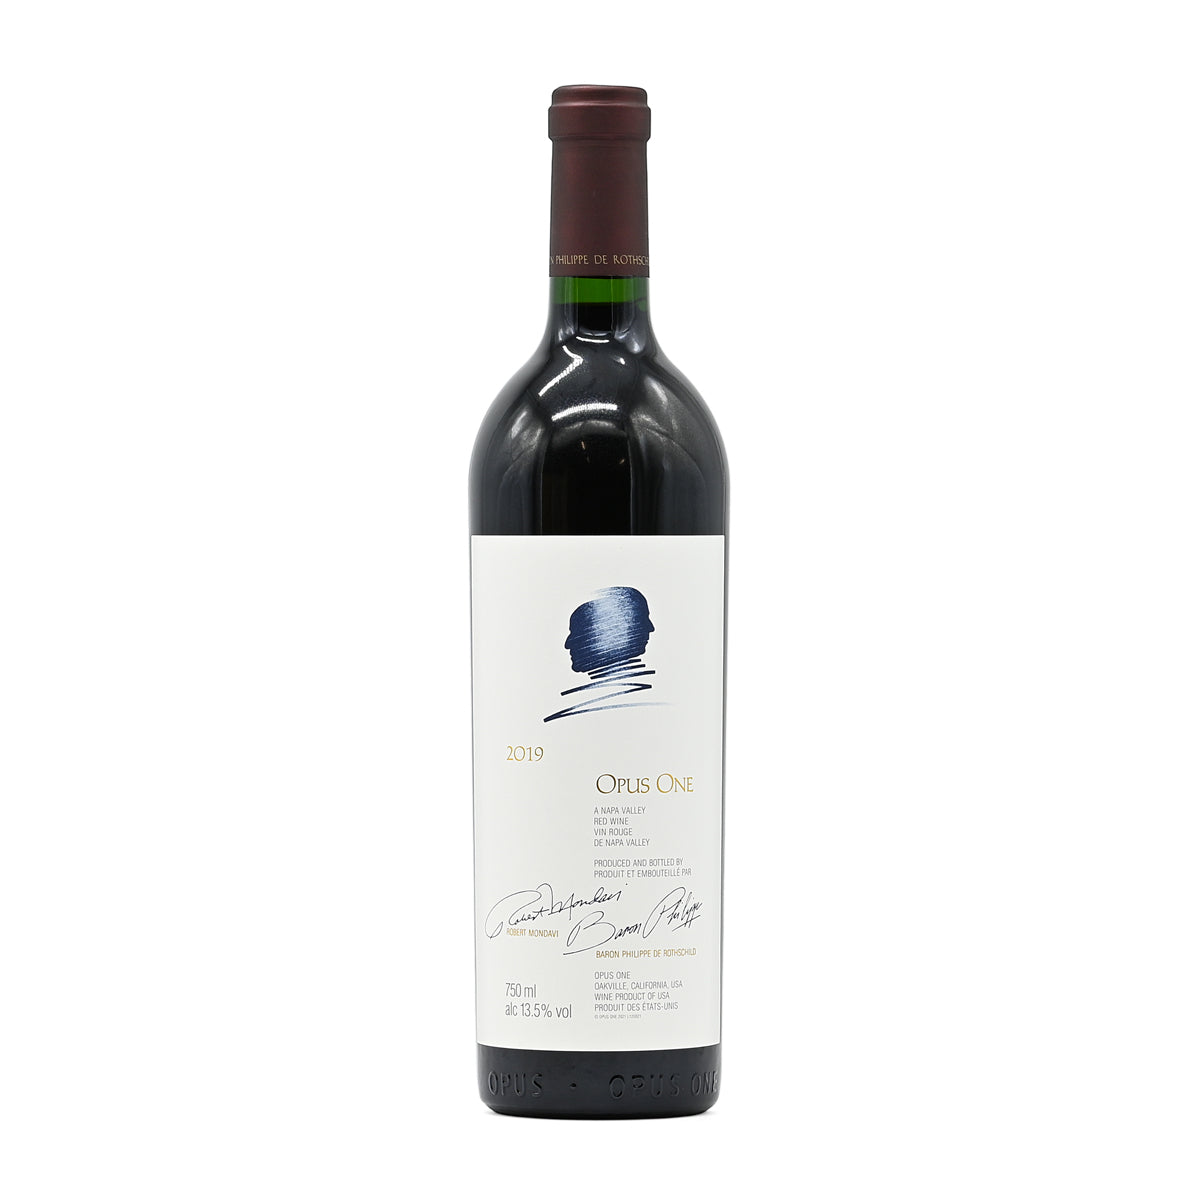 Opus One 2019, 750ml American red wine; made from a blend of Cabernet Sauvignon, Merlot, Malbec, Cabernet Franc, and Petit Verdot; from Napa Valley, California, USA – GDV Fine Wines, Hong Kong